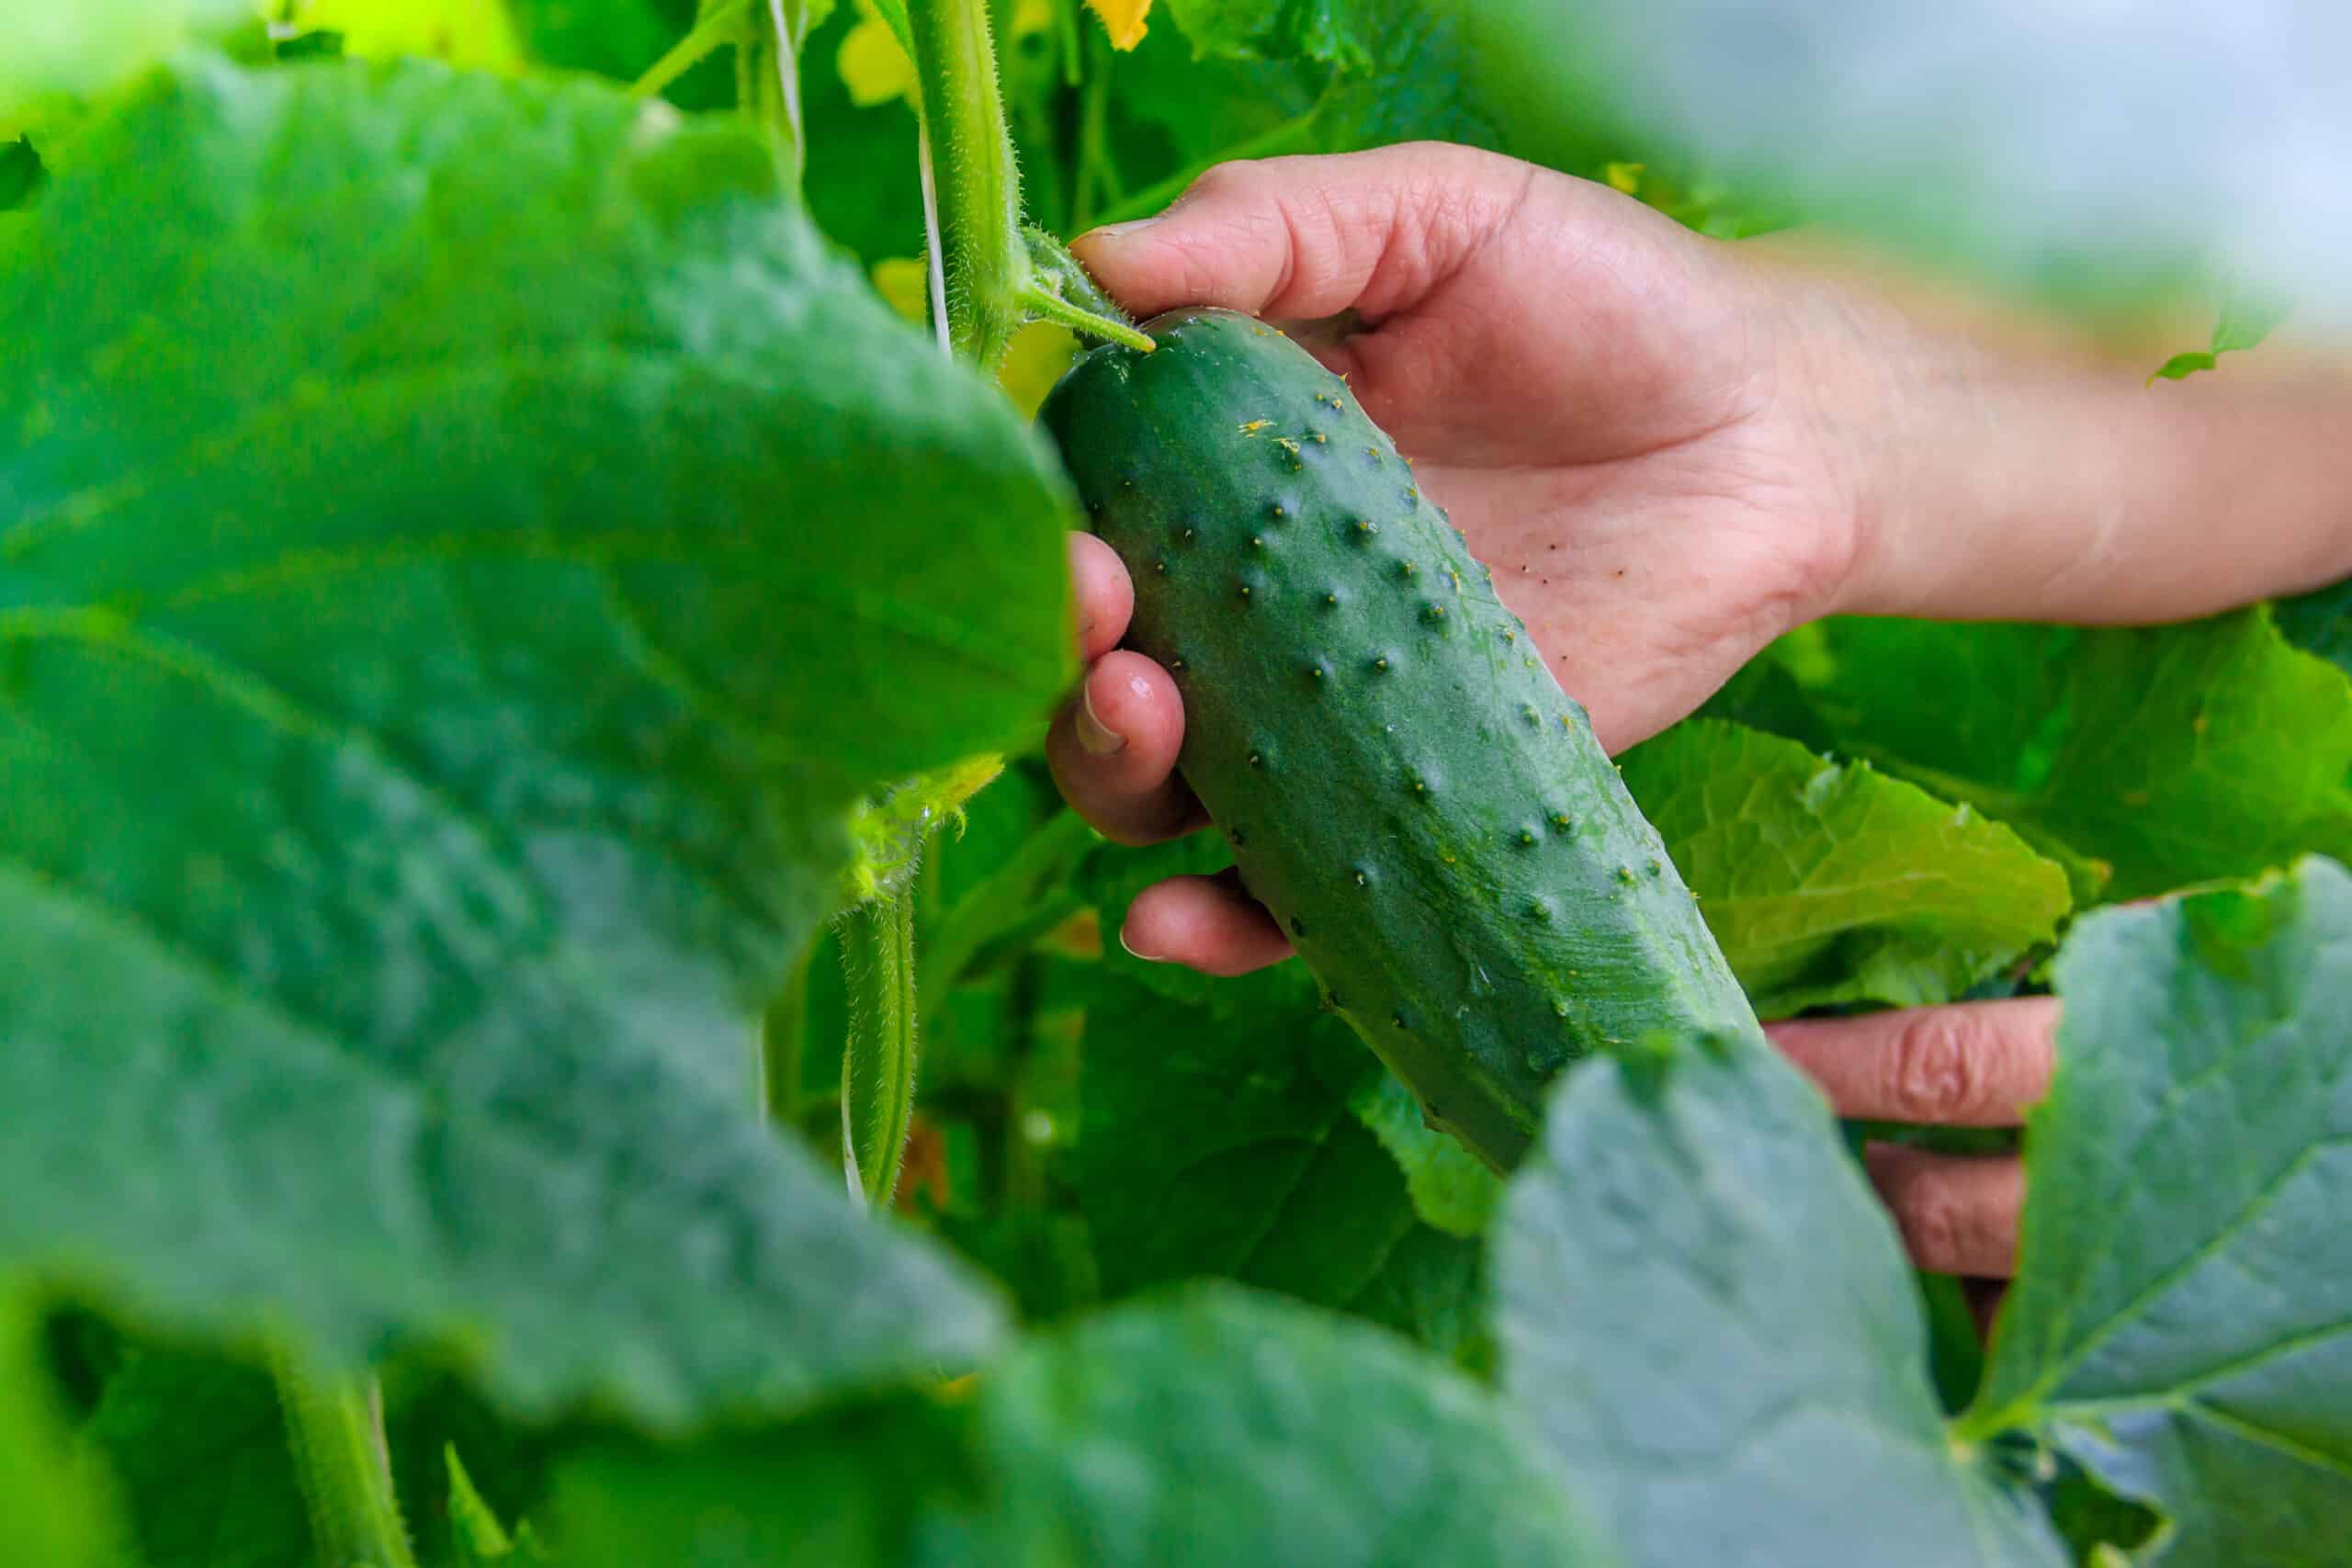 man harvesting cucumber, hand pulling out the cucumber from vine